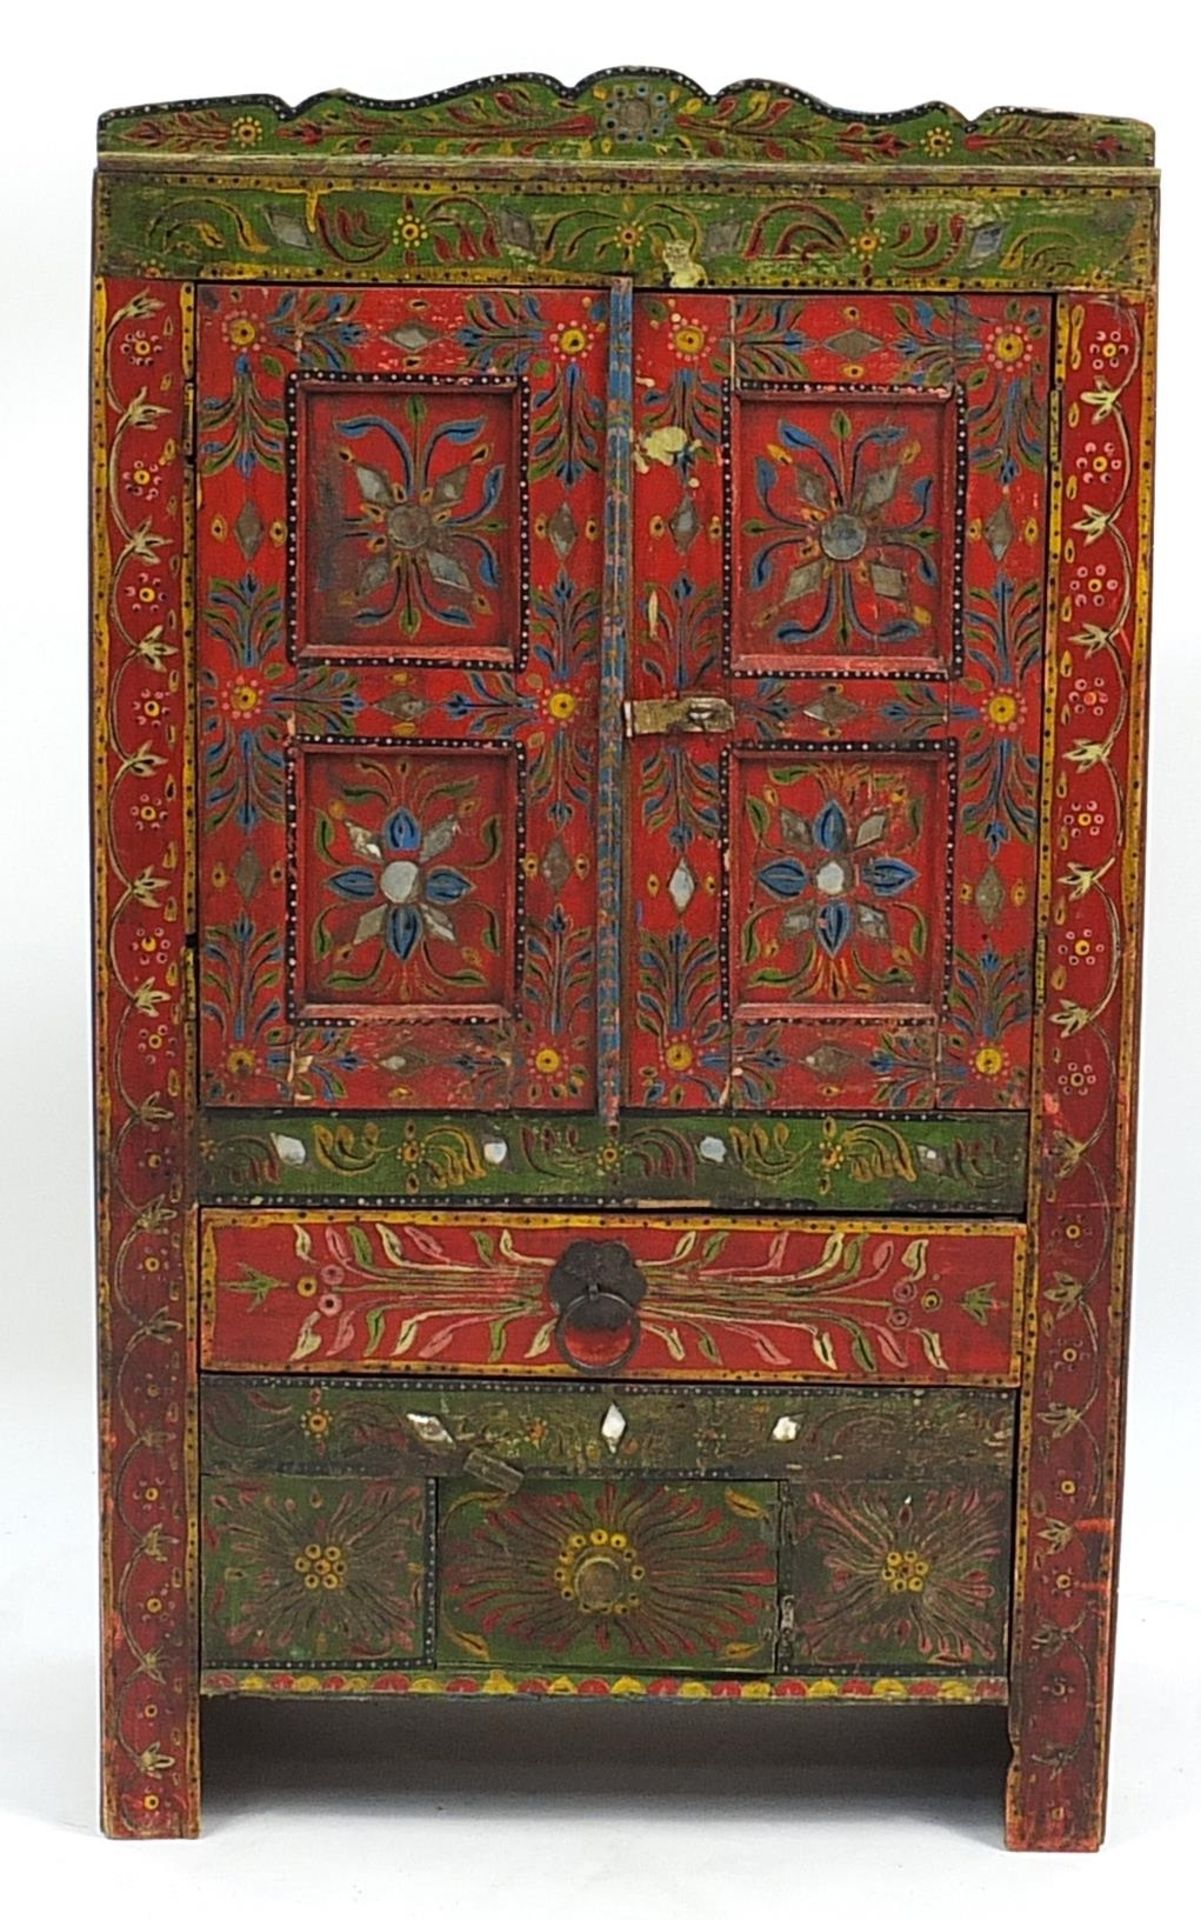 Afghan painted wood marriage chest, 99cm H x 56cm W x 31.5cm D - Image 2 of 3